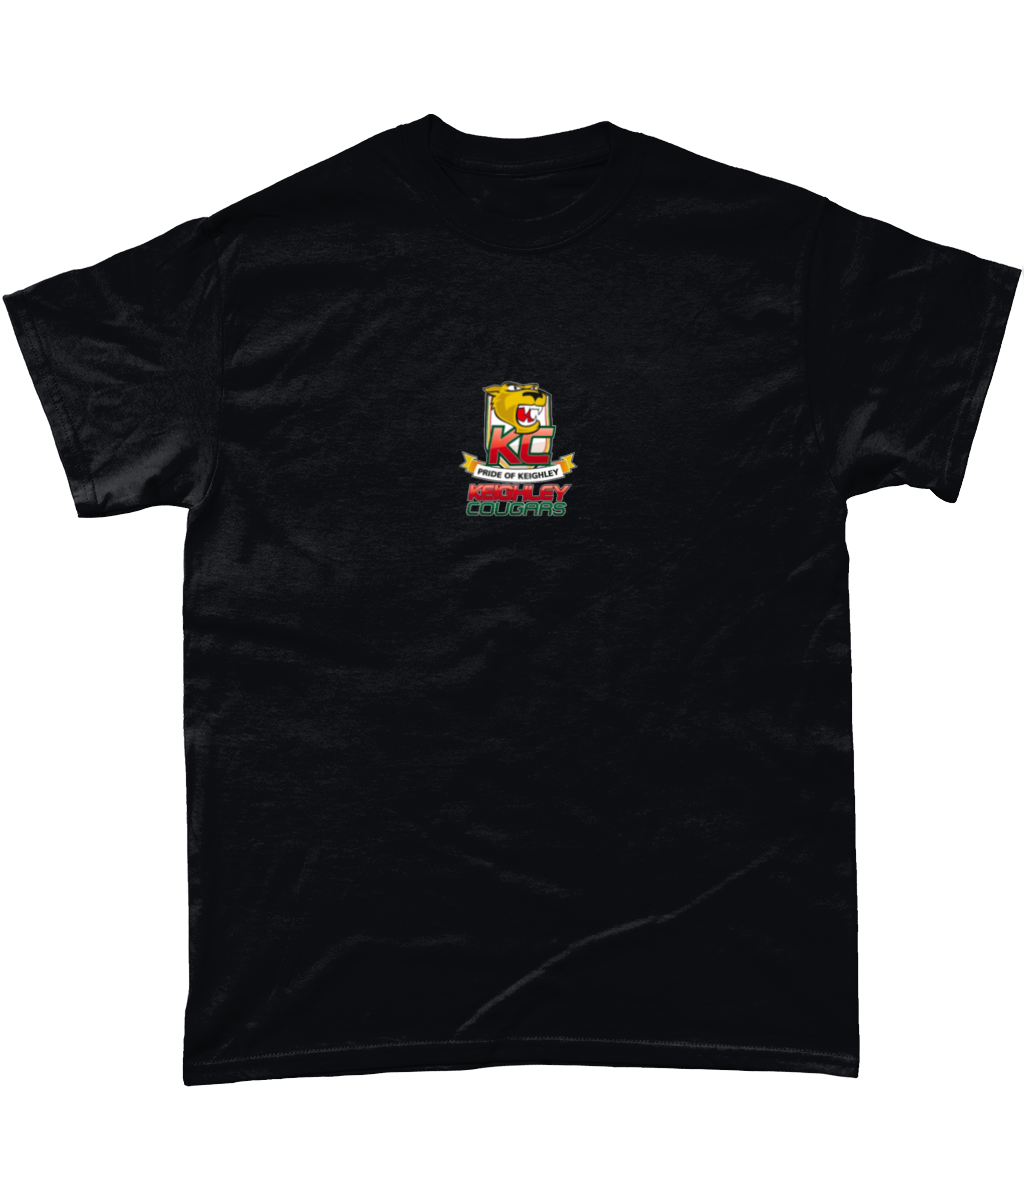 Keighley Cougars Buster Supporters T-Shirt